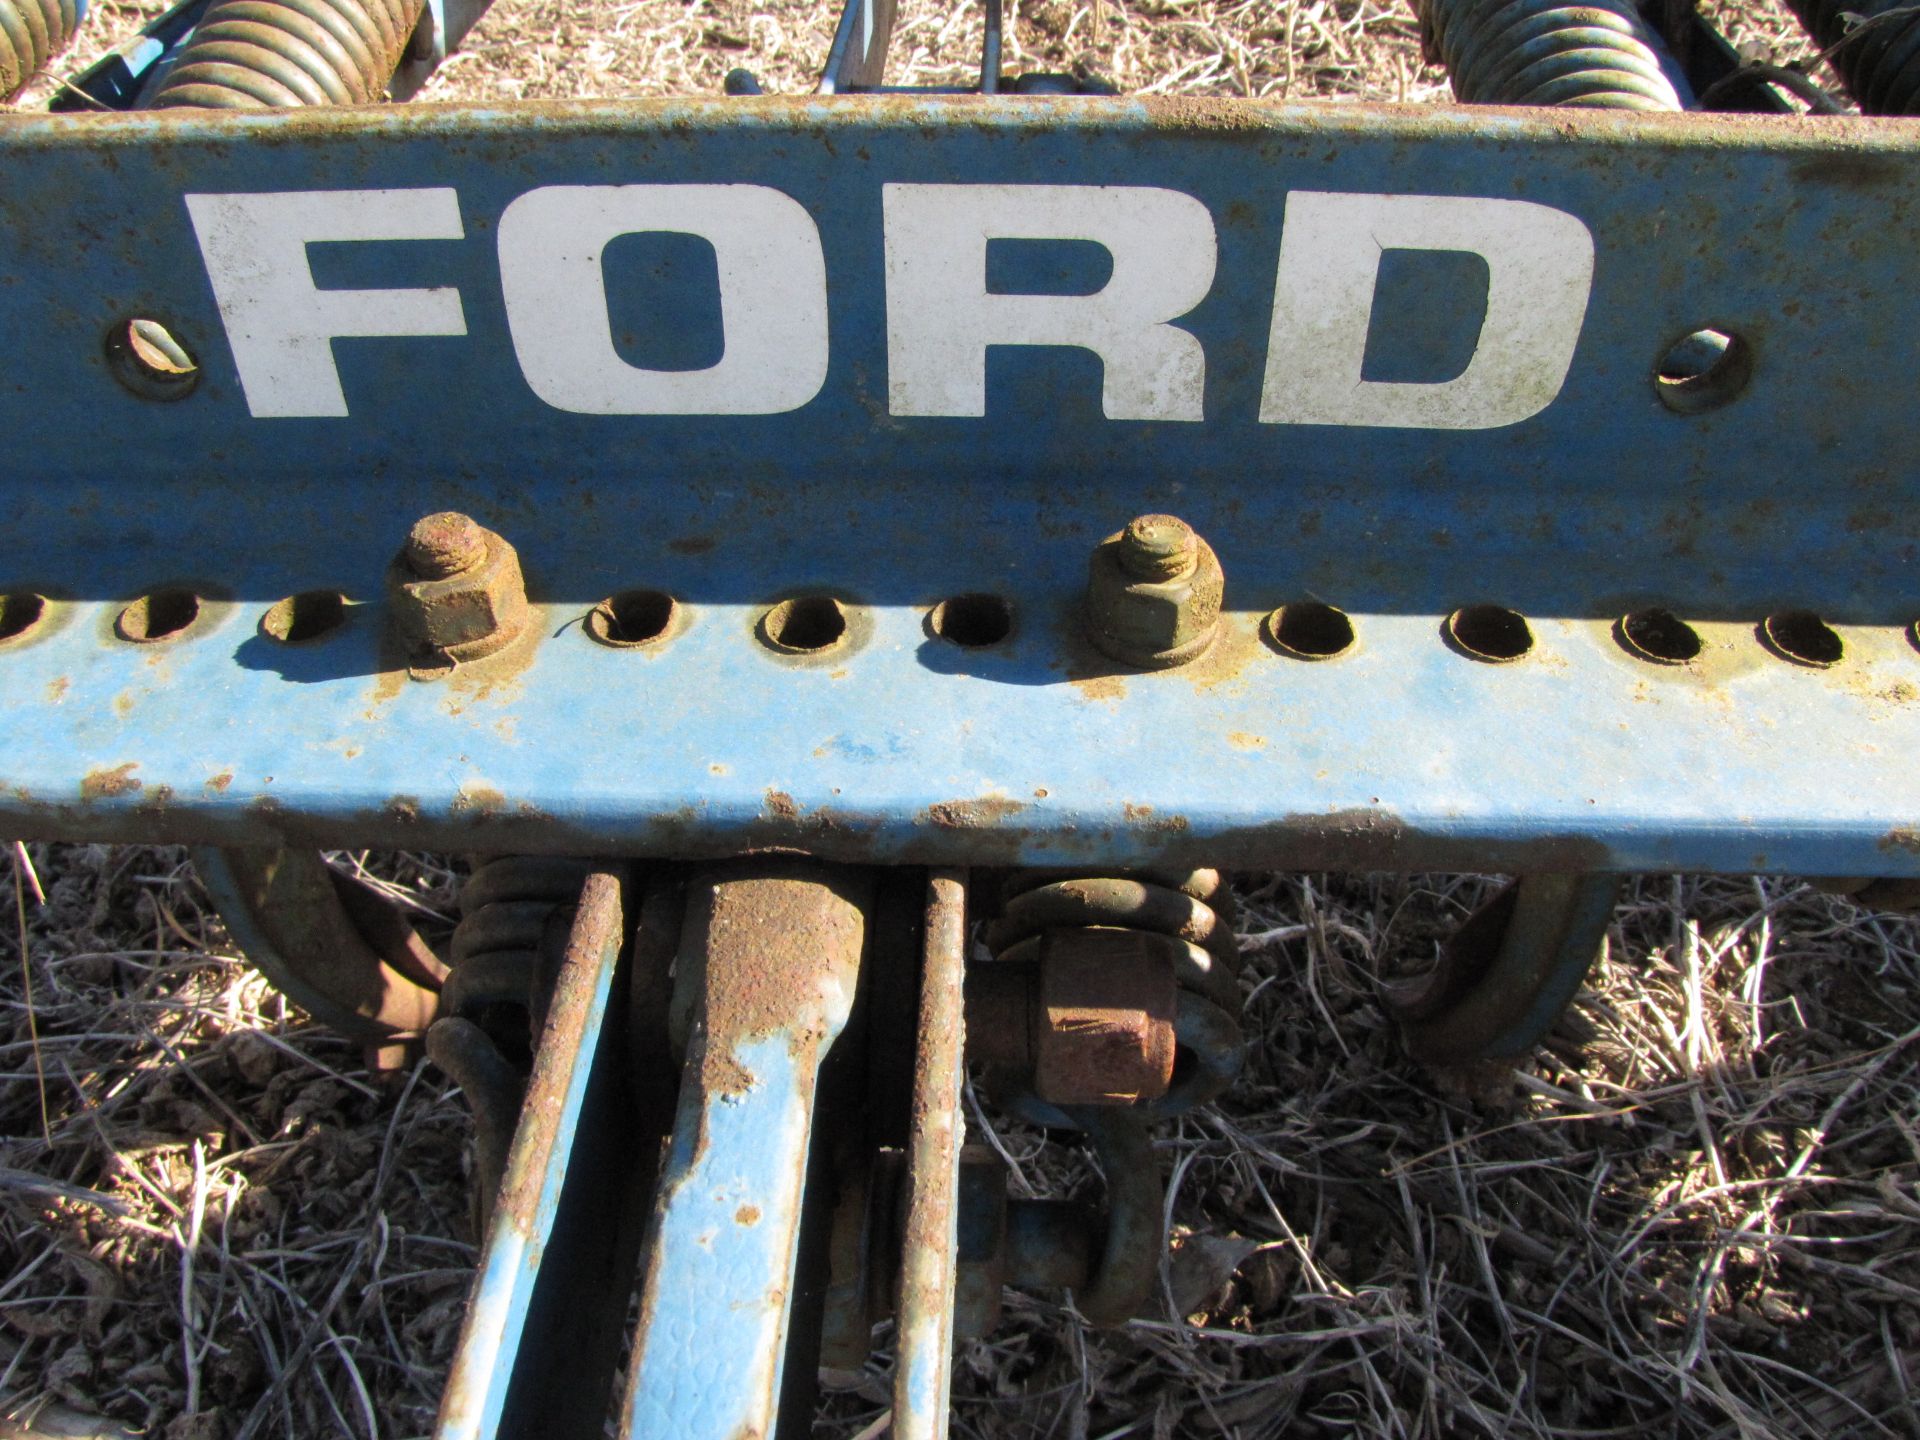 8' Ford Cultivator - Image 5 of 10